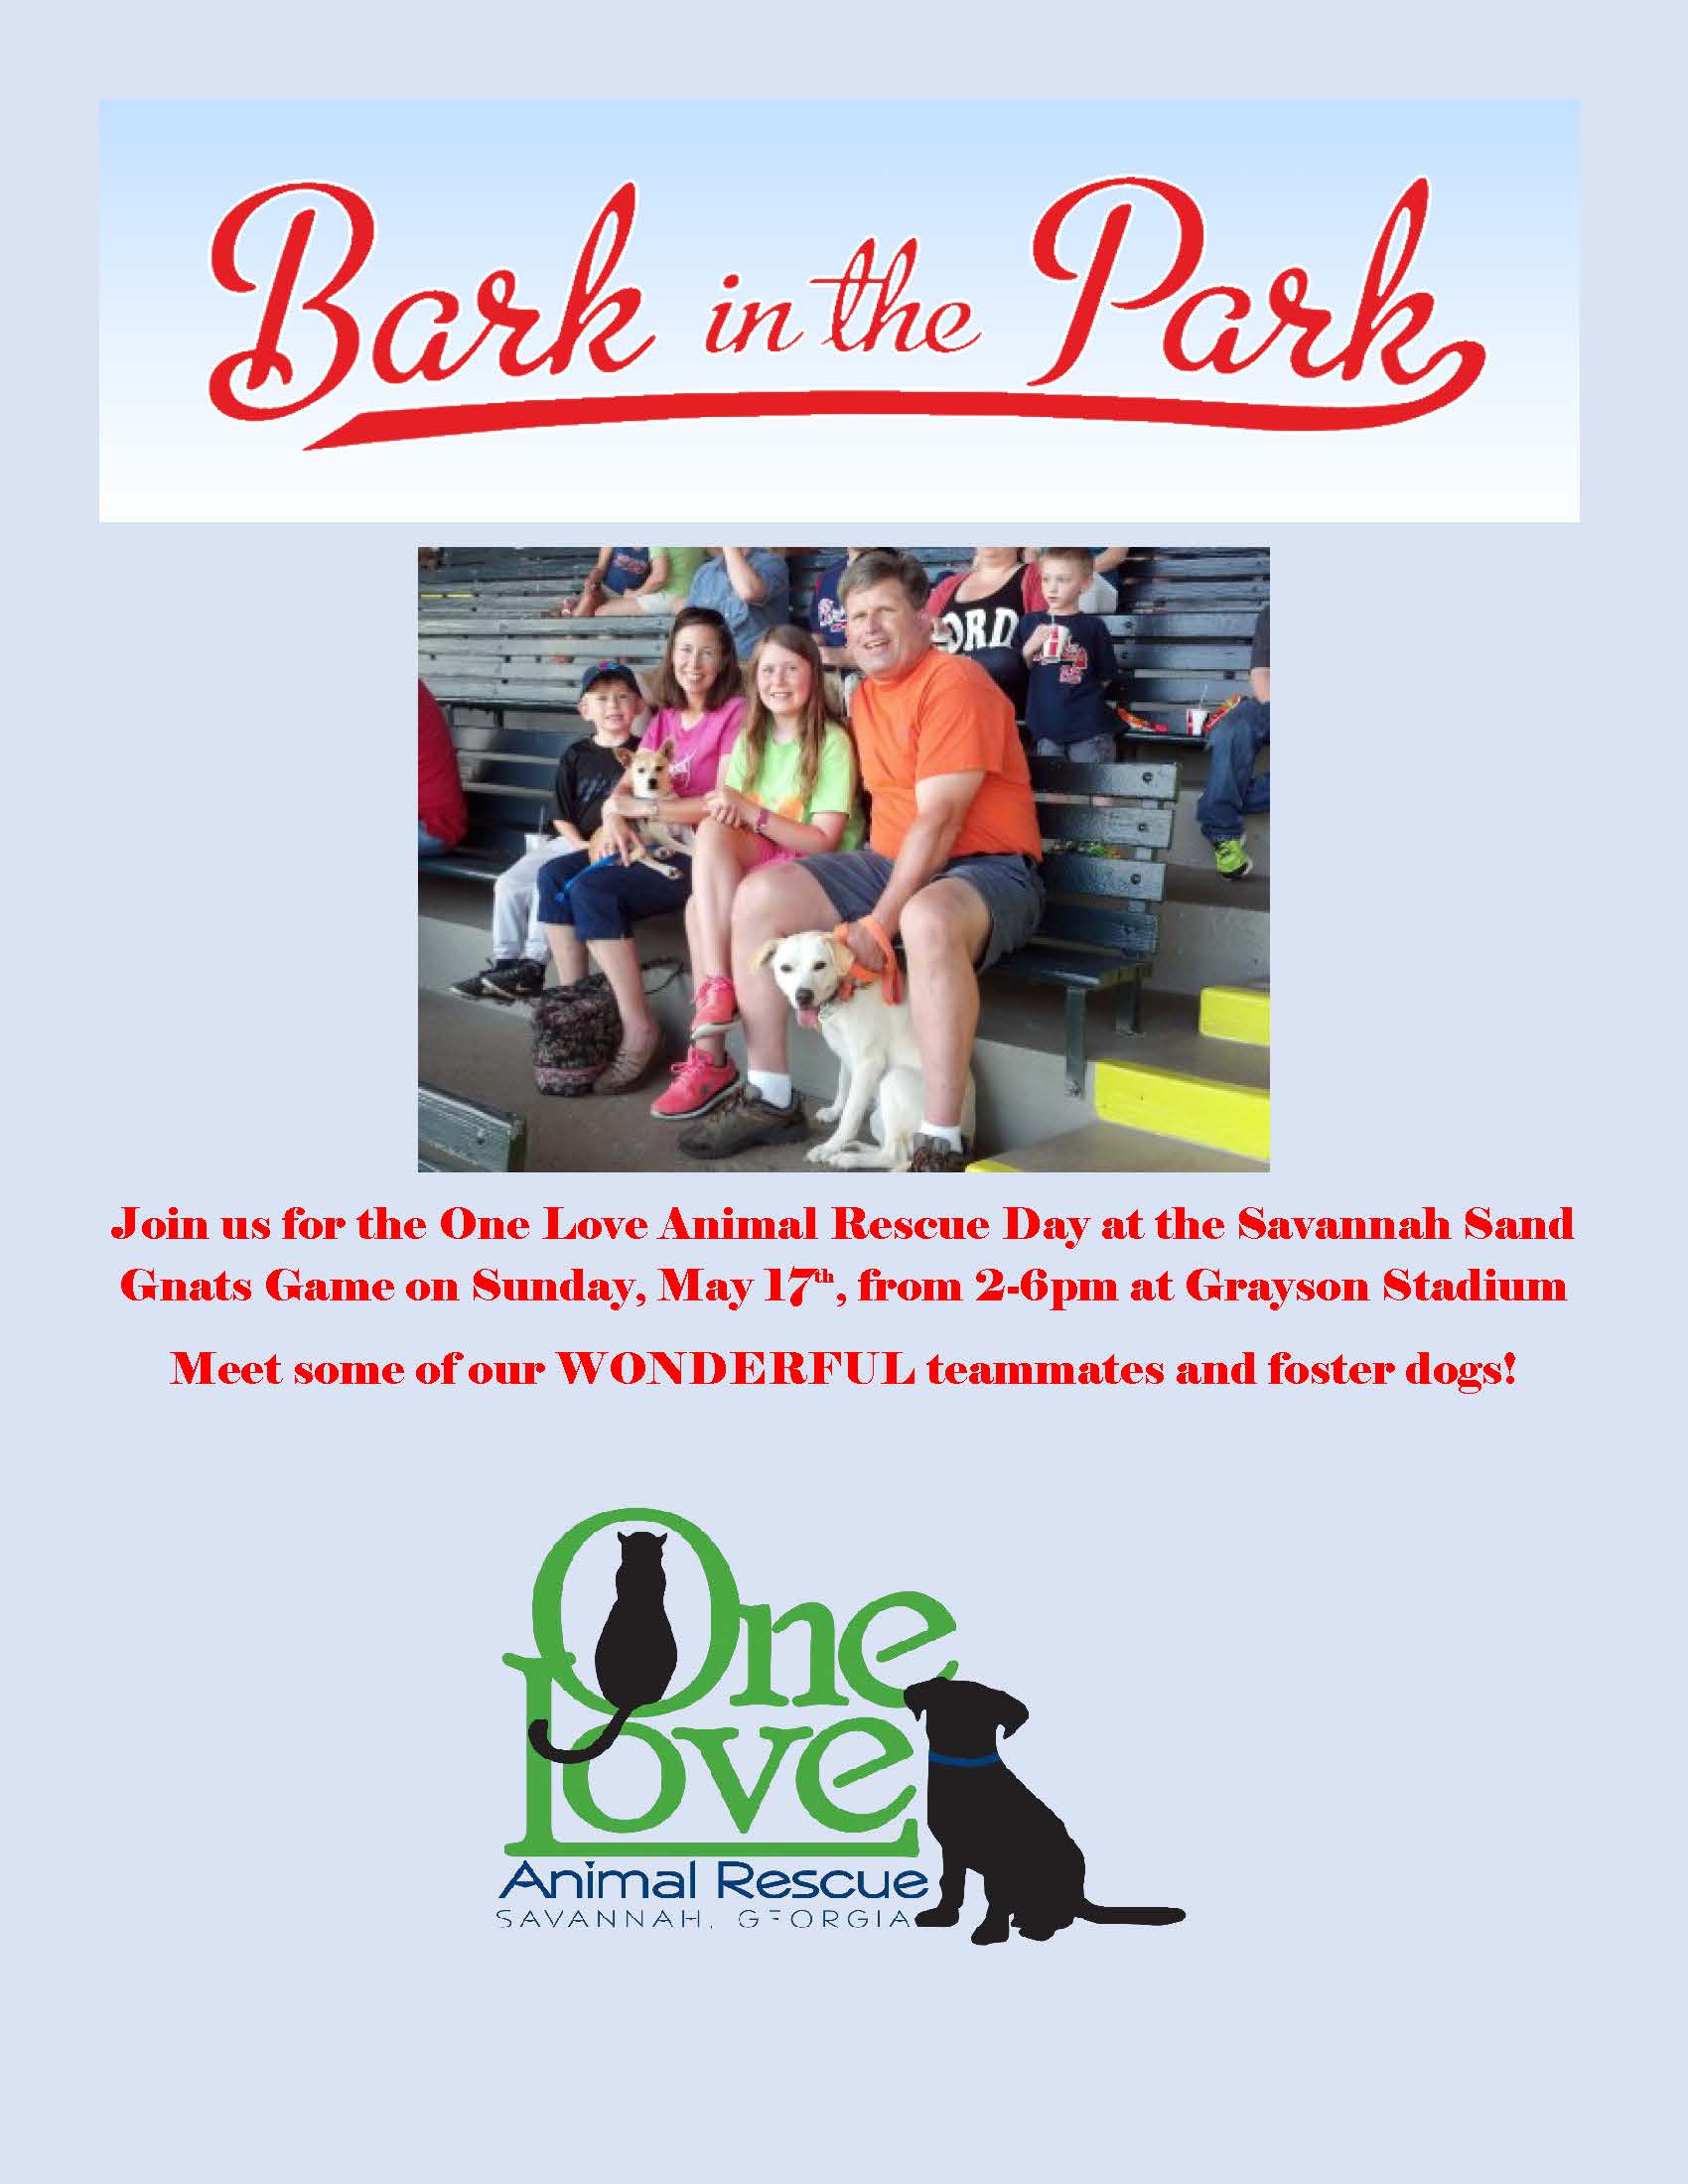 BARK IN THE PARK – SAND GNATS AND ONE LOVE ANIMAL RESCUE – MAY 17TH